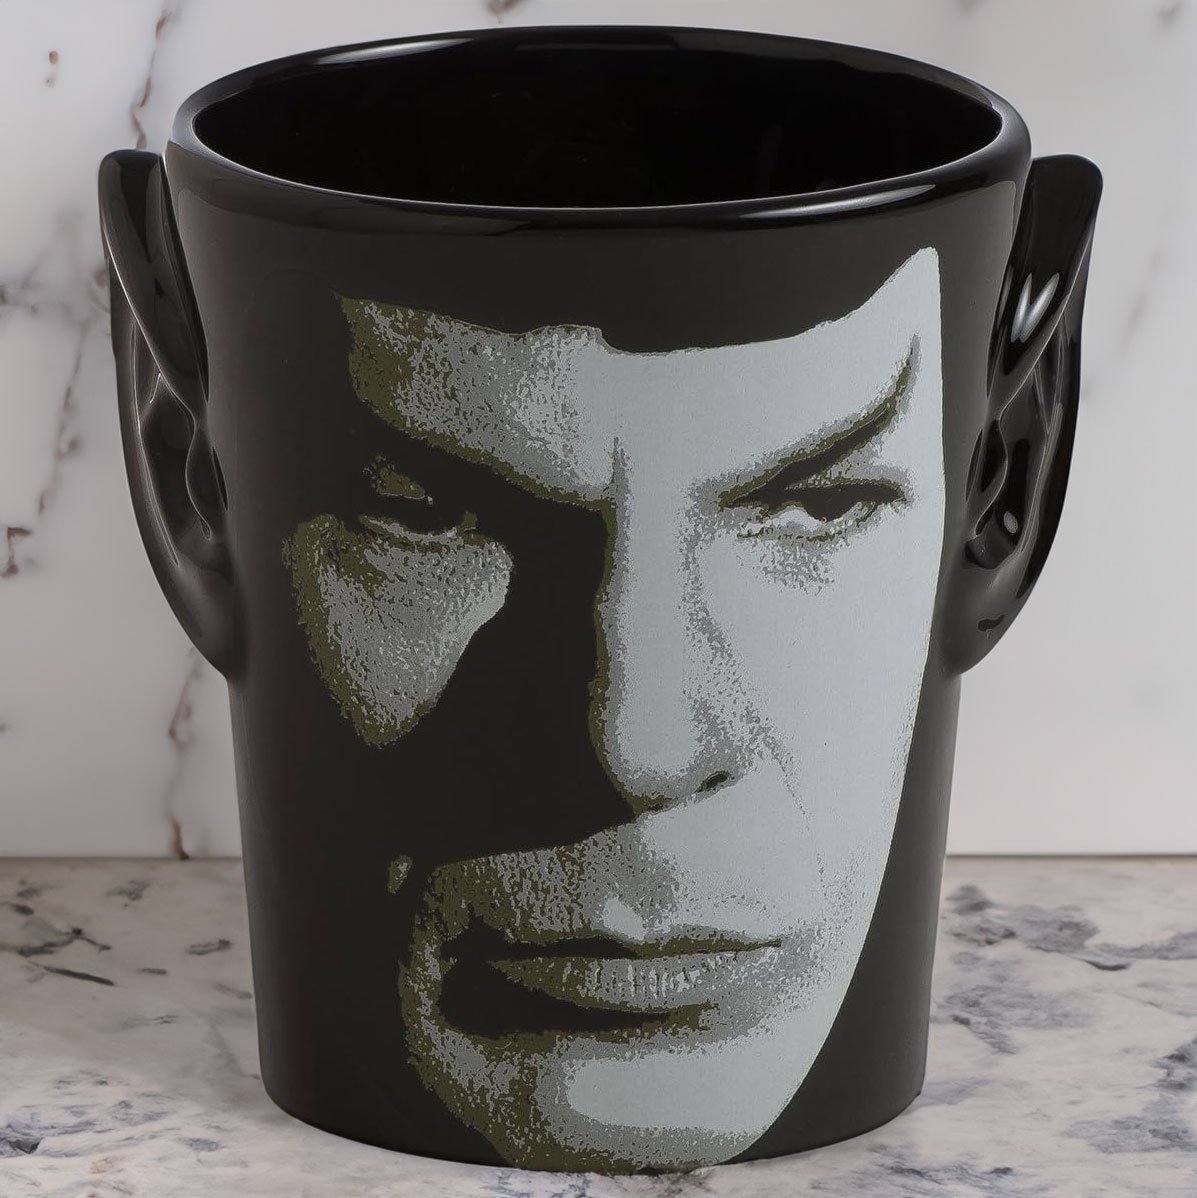 10 Perfect Star Trek Gifts For The Trekkie In Your Life